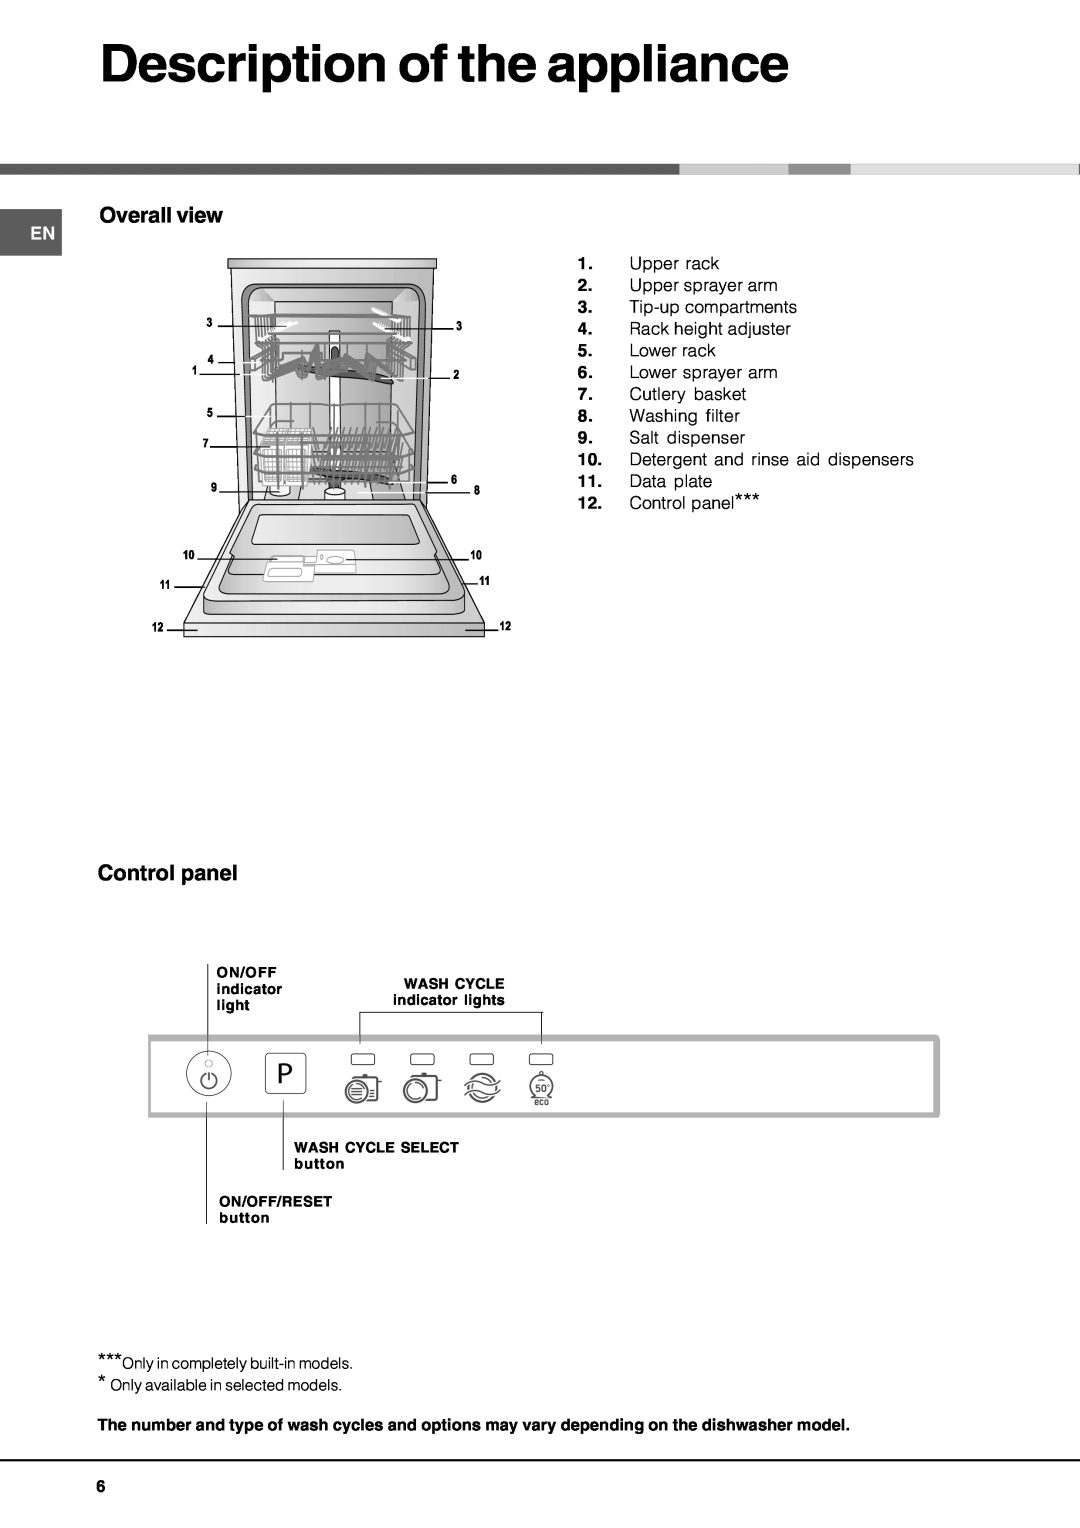 Hotpoint lft 114 manual Description of the appliance, Overall view, Control panel 